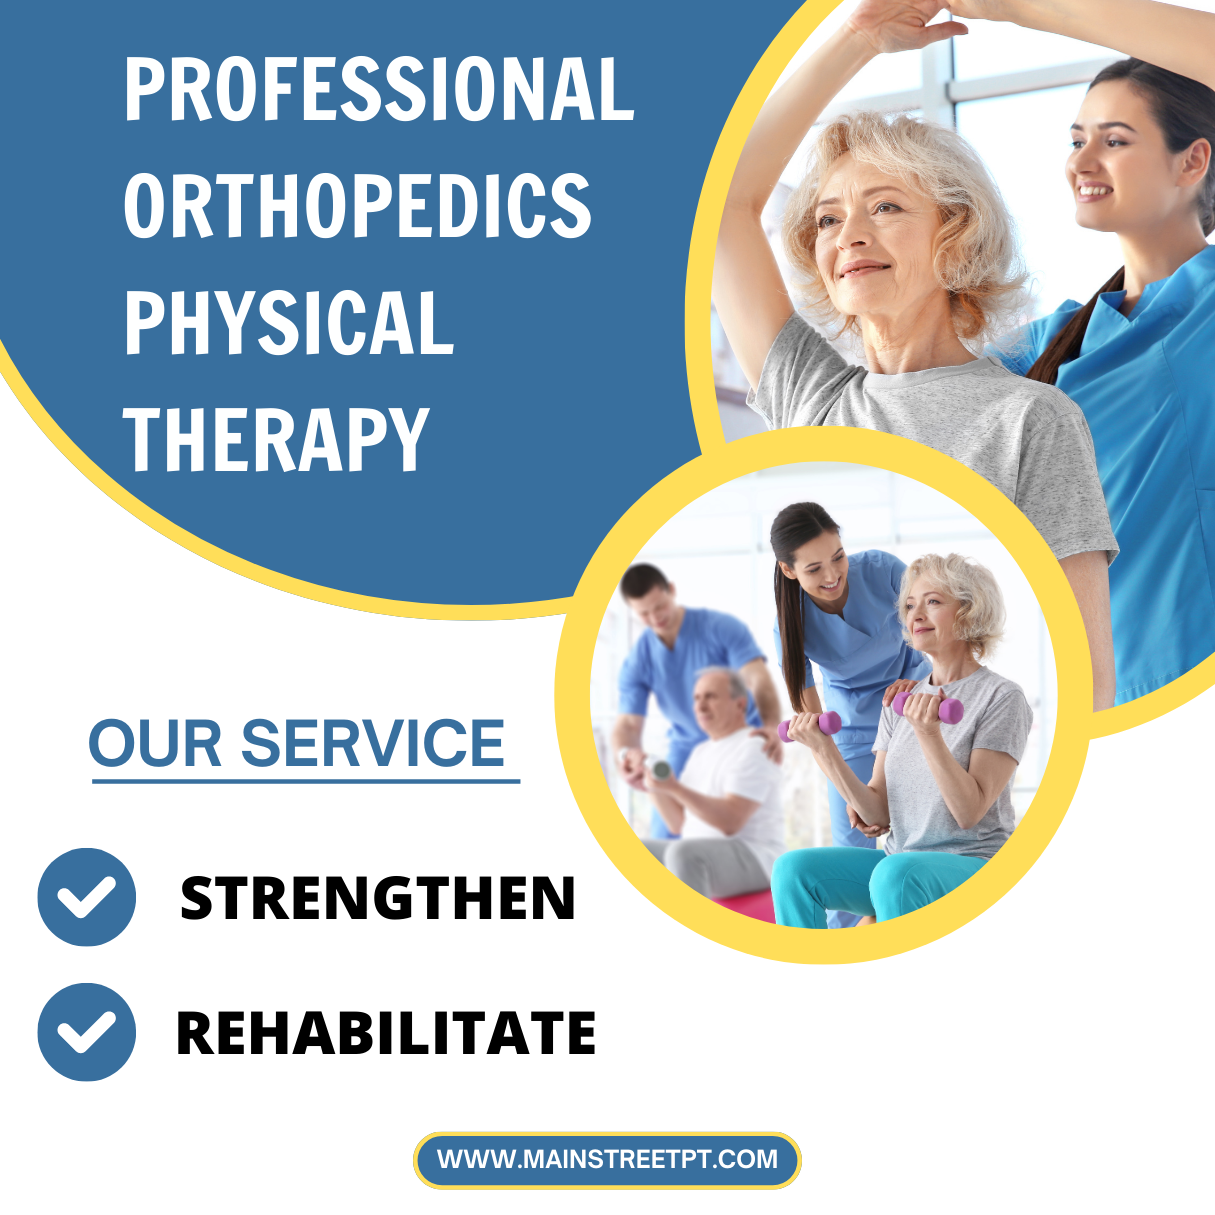 How to choose the right physical therapist for orthopedic treatment